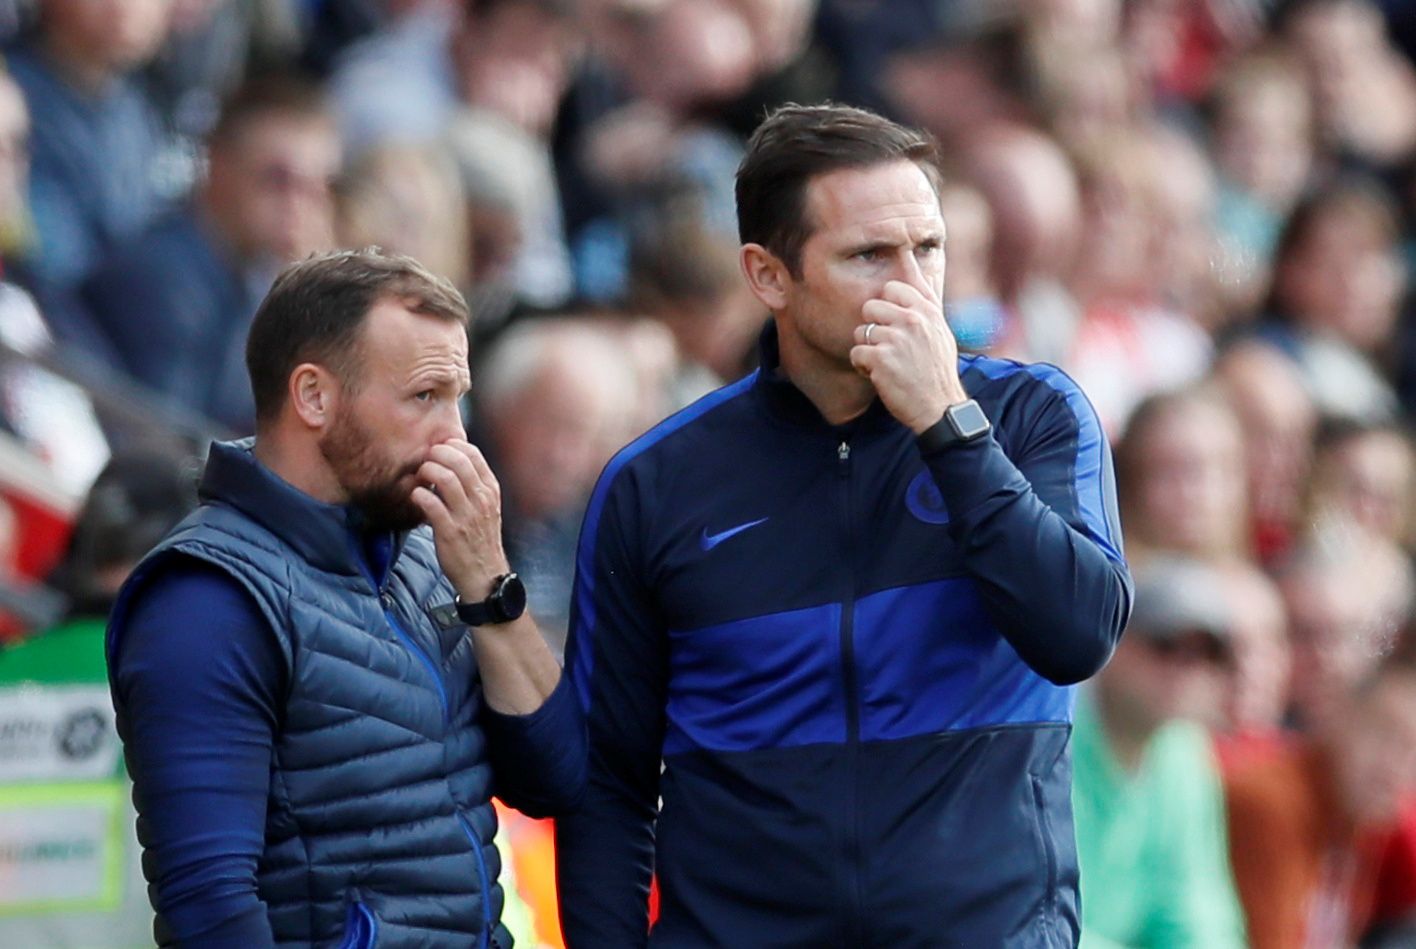 Soccer Football - Premier League - Southampton v Chelsea - St Mary's Stadium, Southampton, Britain - October 6, 2019  Chelsea manager Frank Lampard and assistant manager Jody Morris look on  REUTERS/David Klein  EDITORIAL USE ONLY. No use with unauthorized audio, video, data, fixture lists, club/league logos or 